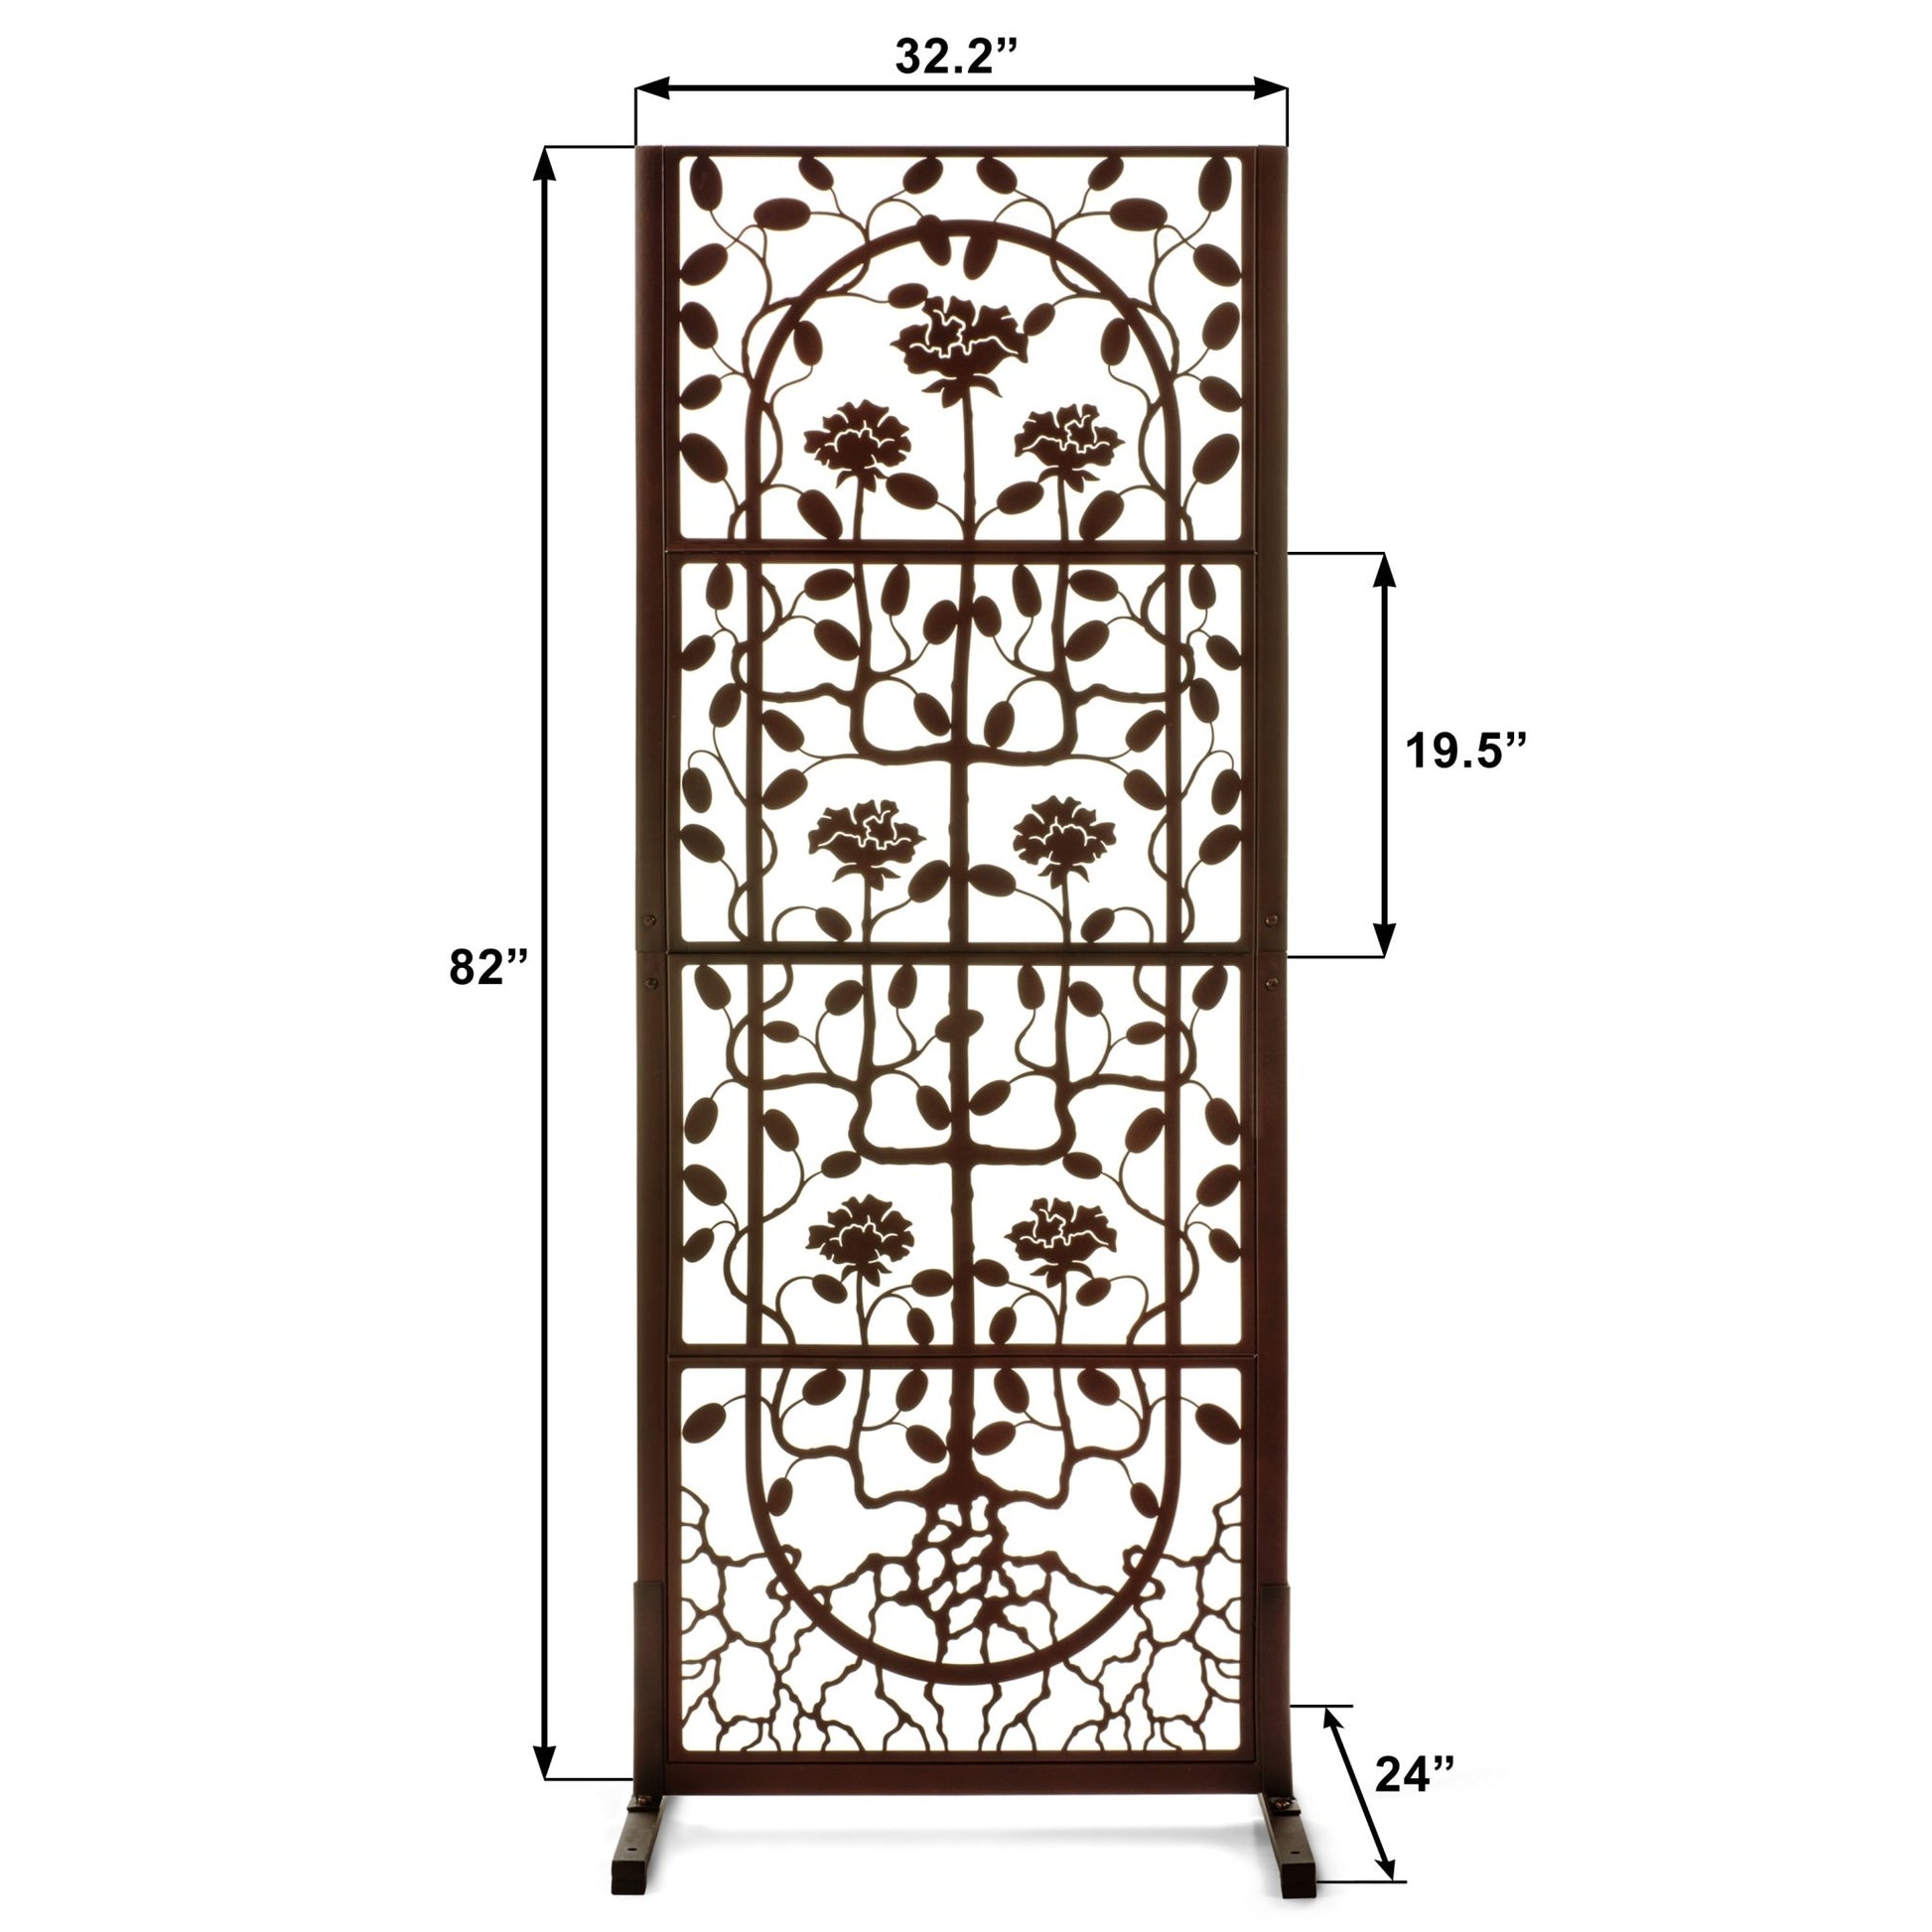 H Potter Rose Trellis Screen Privacy for Patio Deck Balcony